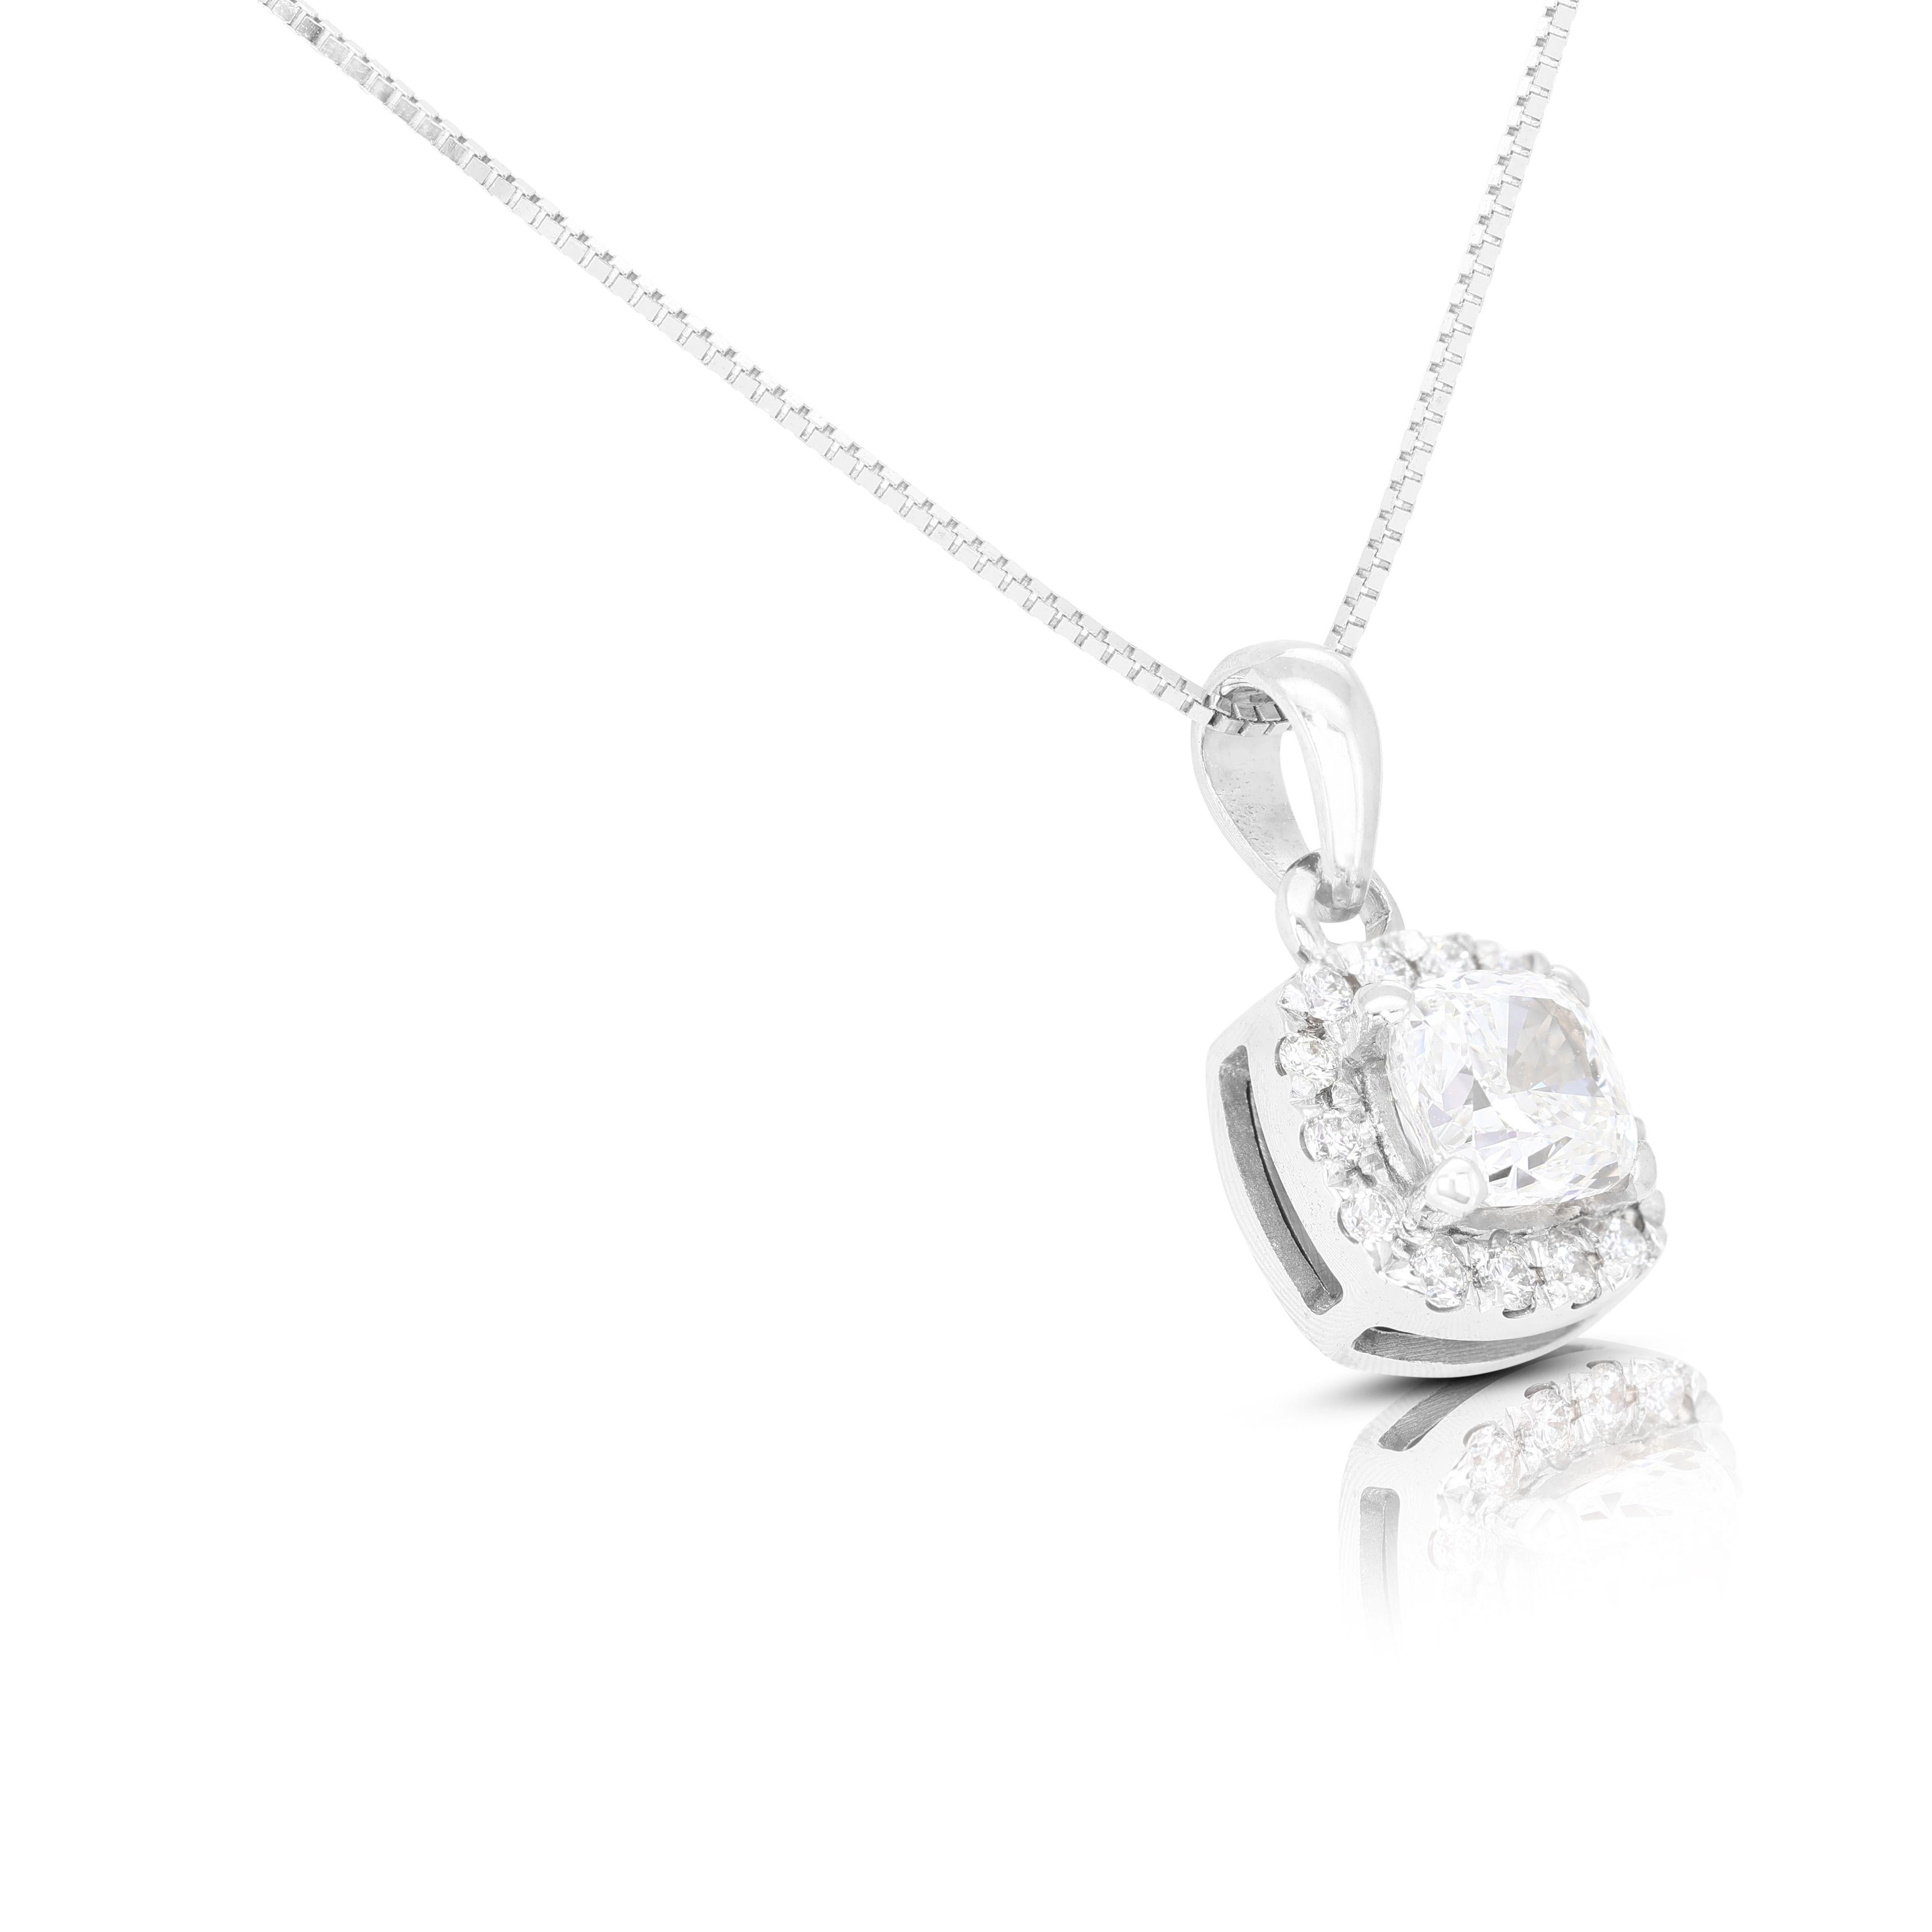 Cushion Cut Elegant 18k White Gold Halo Pendant w/ 0.65ct Diamonds - Chain not included For Sale